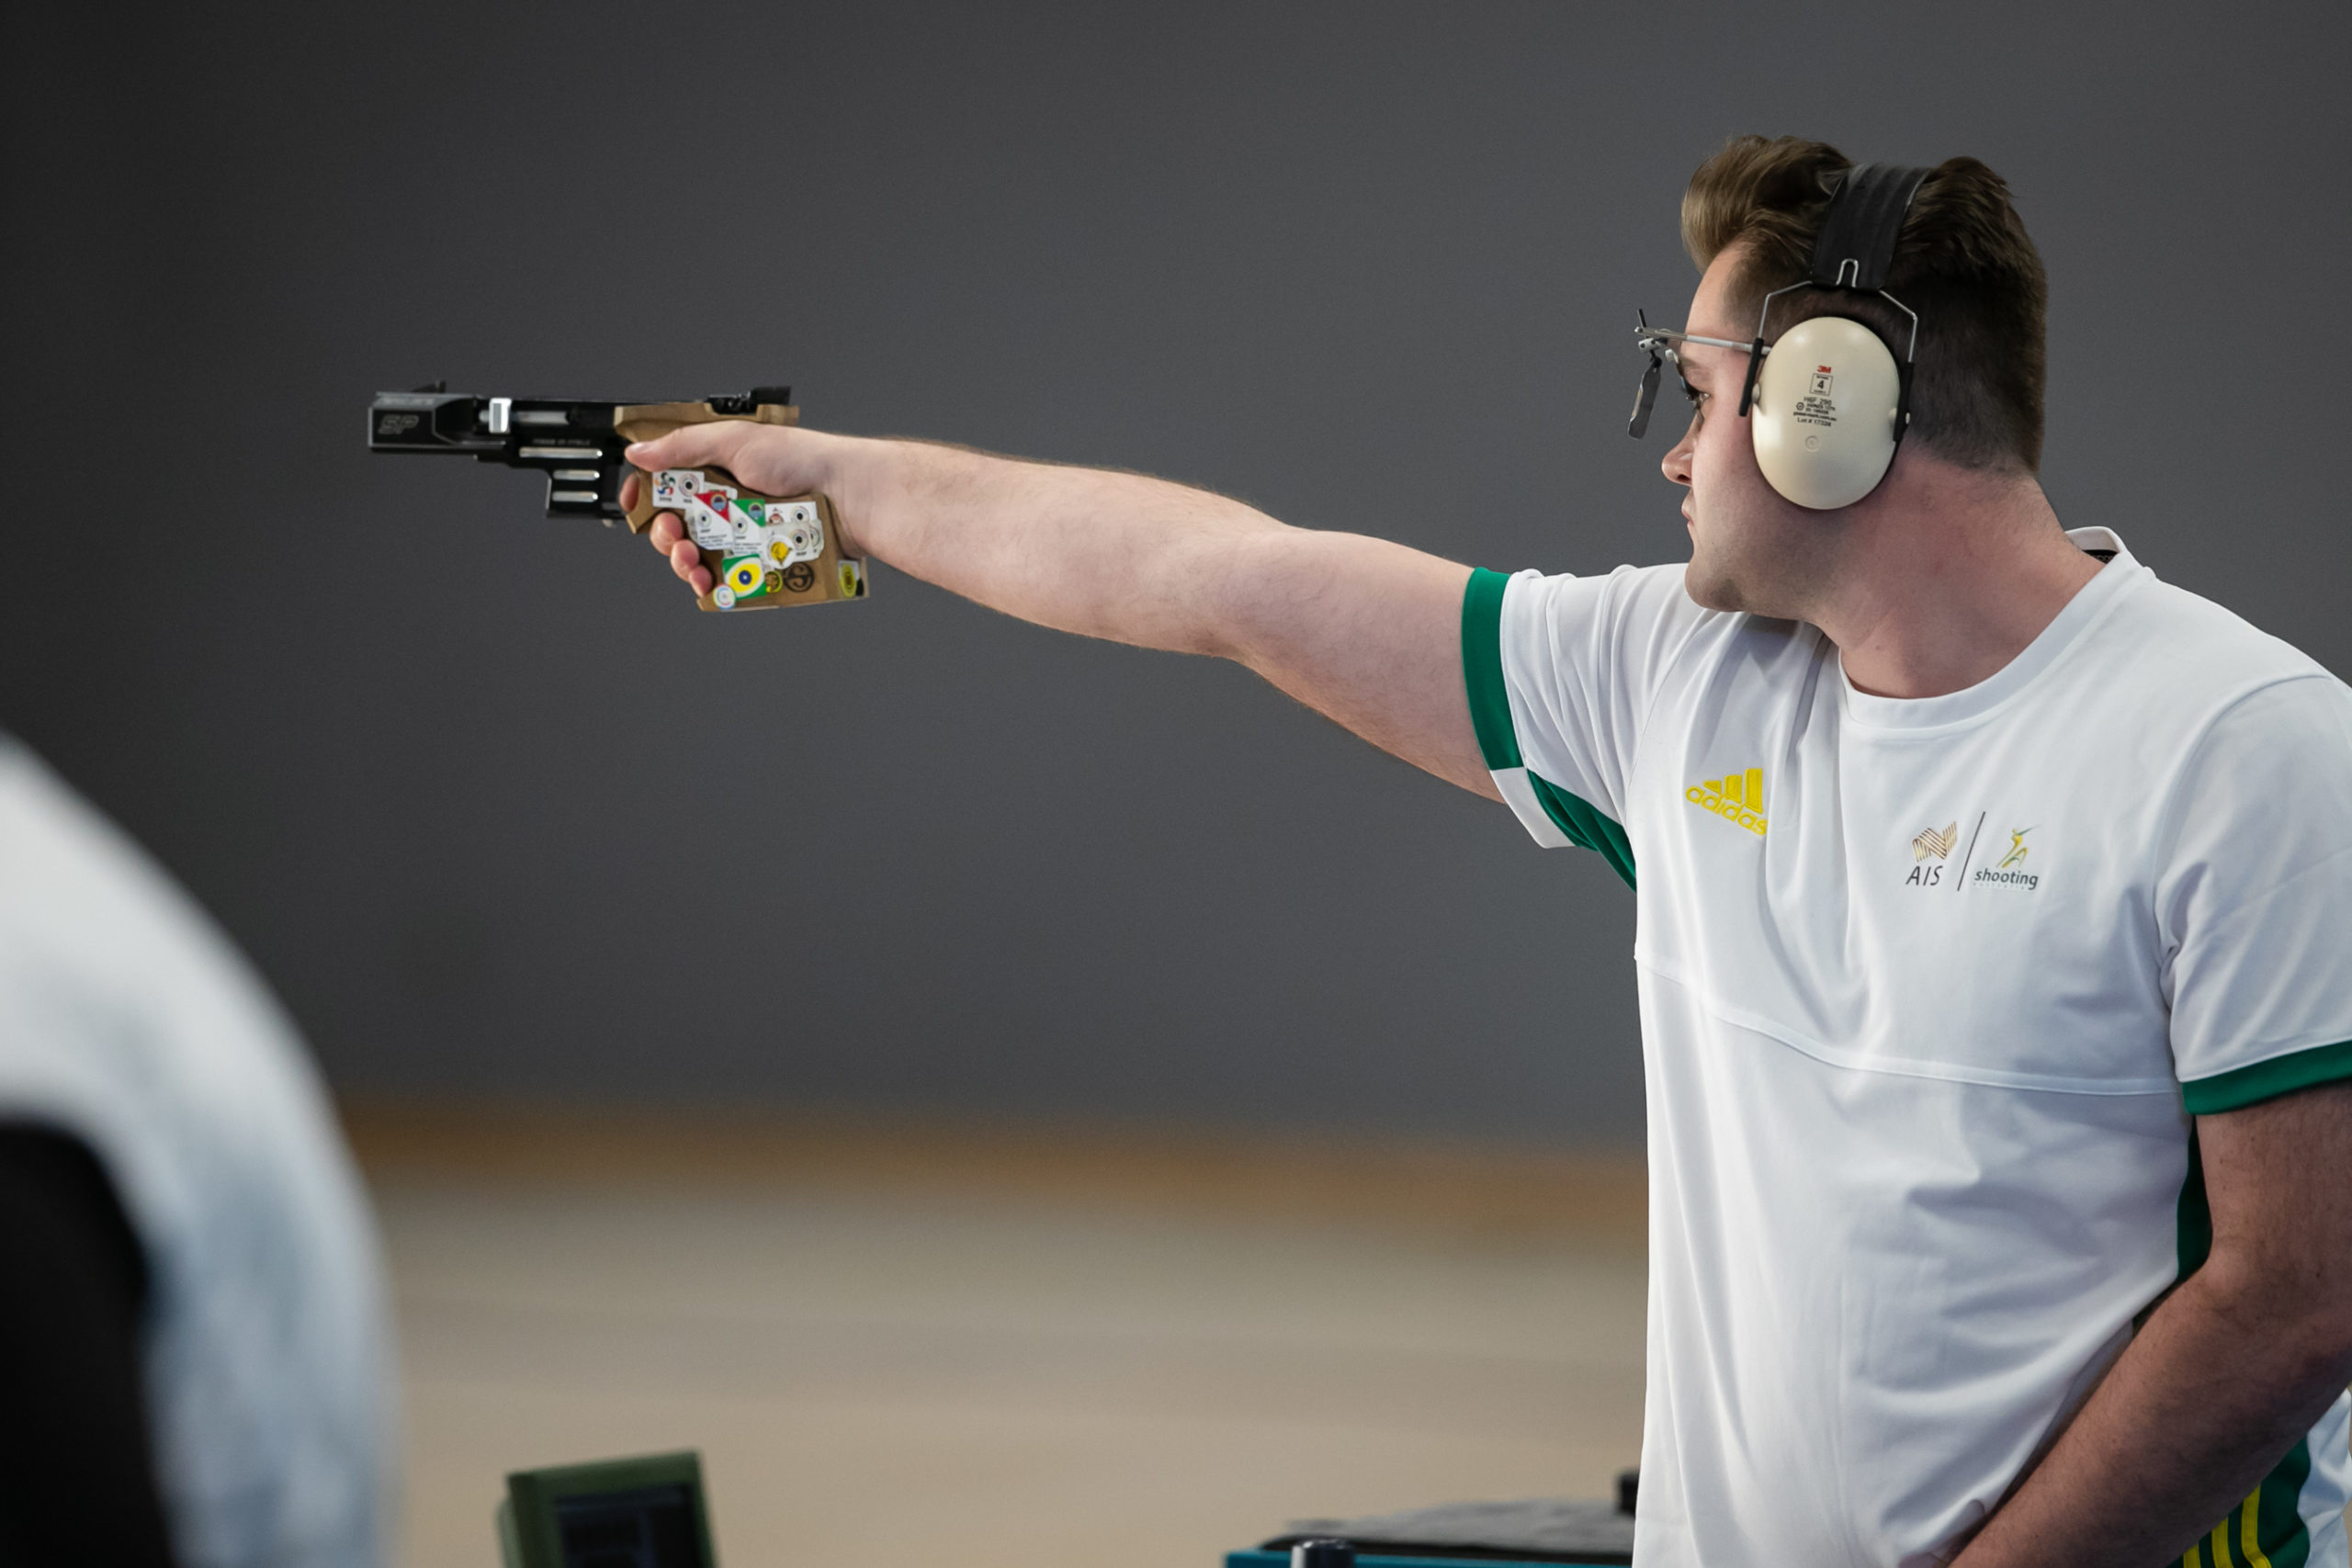 Olympic Shooting: Overview, Rules, Preparation, Interesting Stories